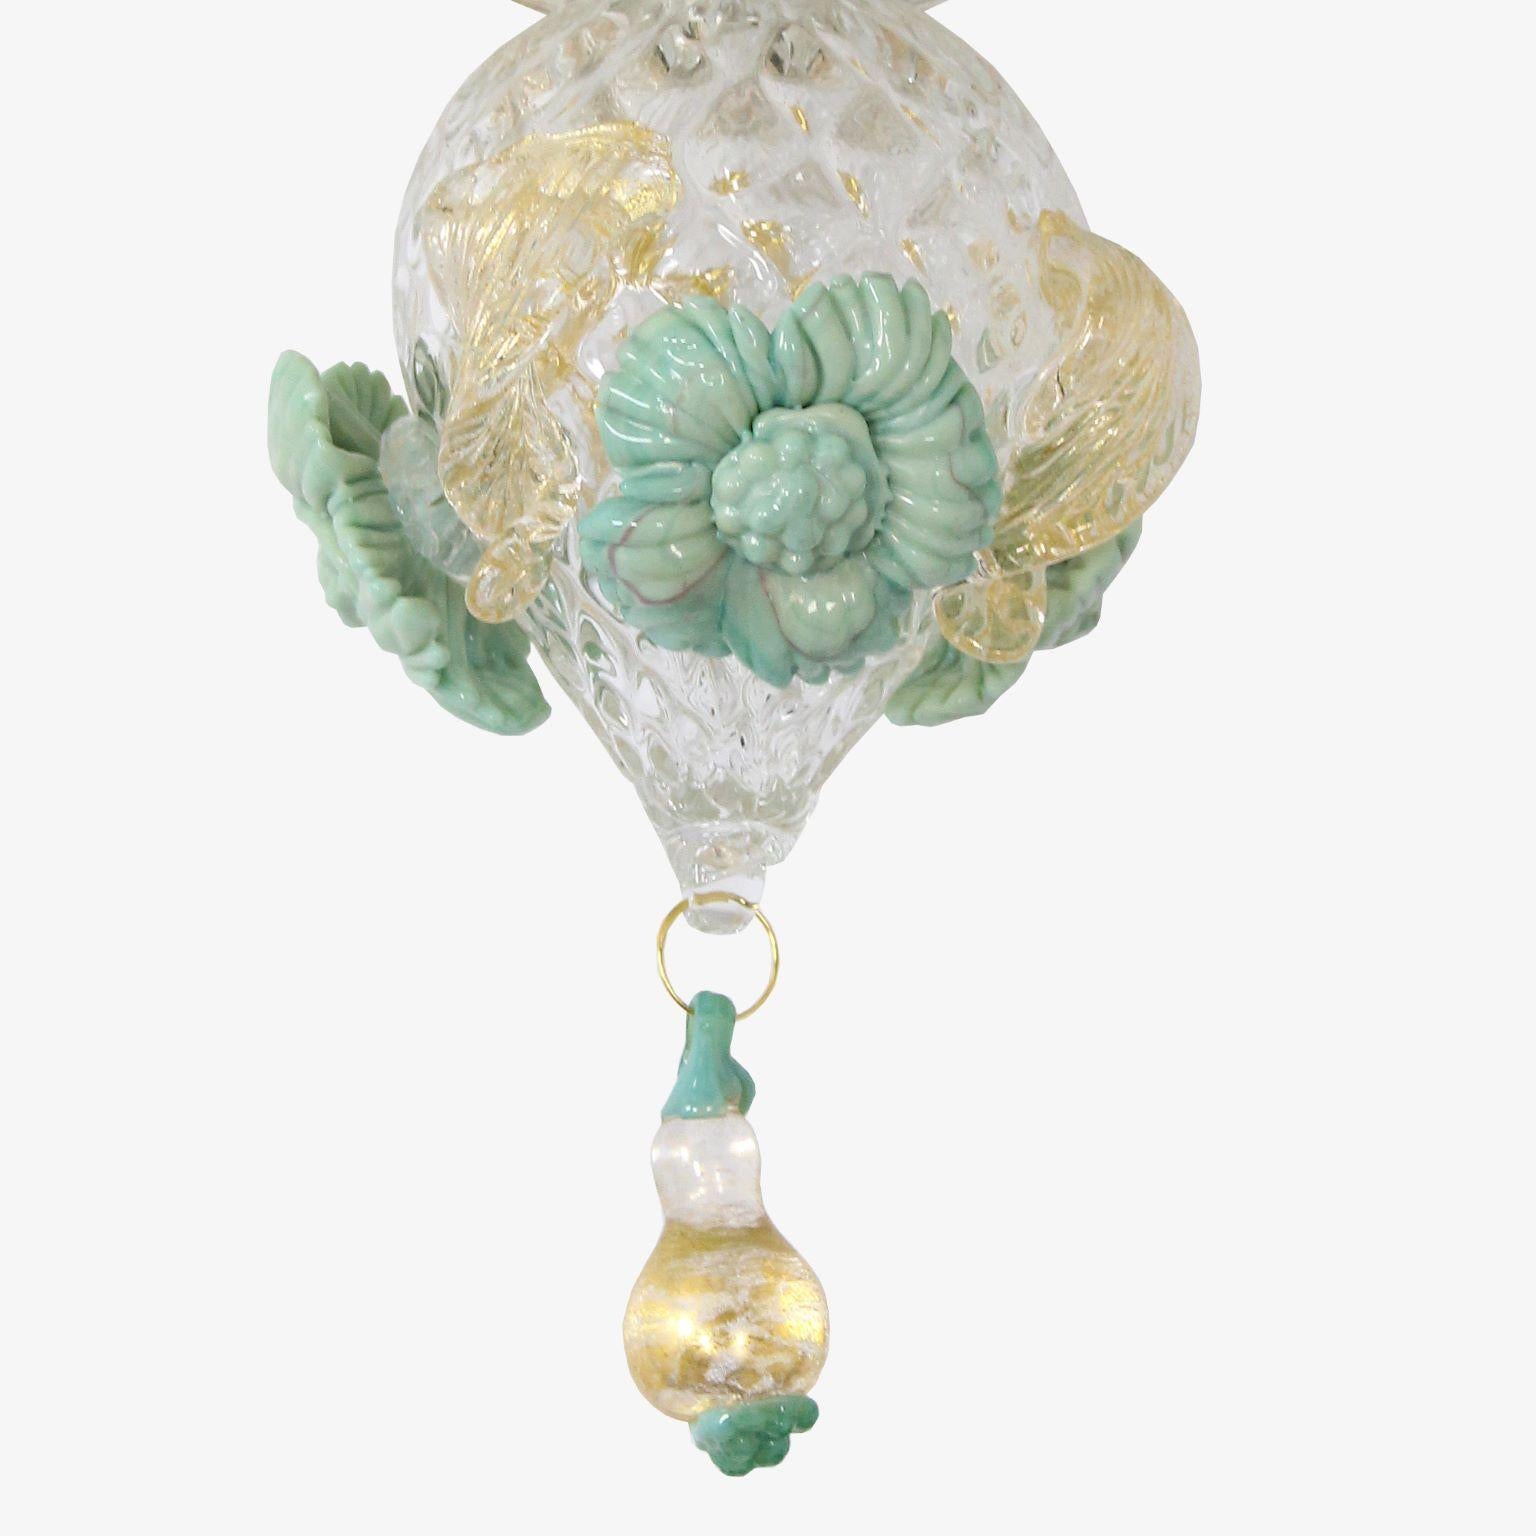 Rezzonico sconce 2 lights, clear Murano glass with gold, grey and green color details in vitreous paste by Multiforme.
This rezzonico sconce is a combination of the traditional Venetian structure with gaudy colors. This sconce is a peculiar lighting